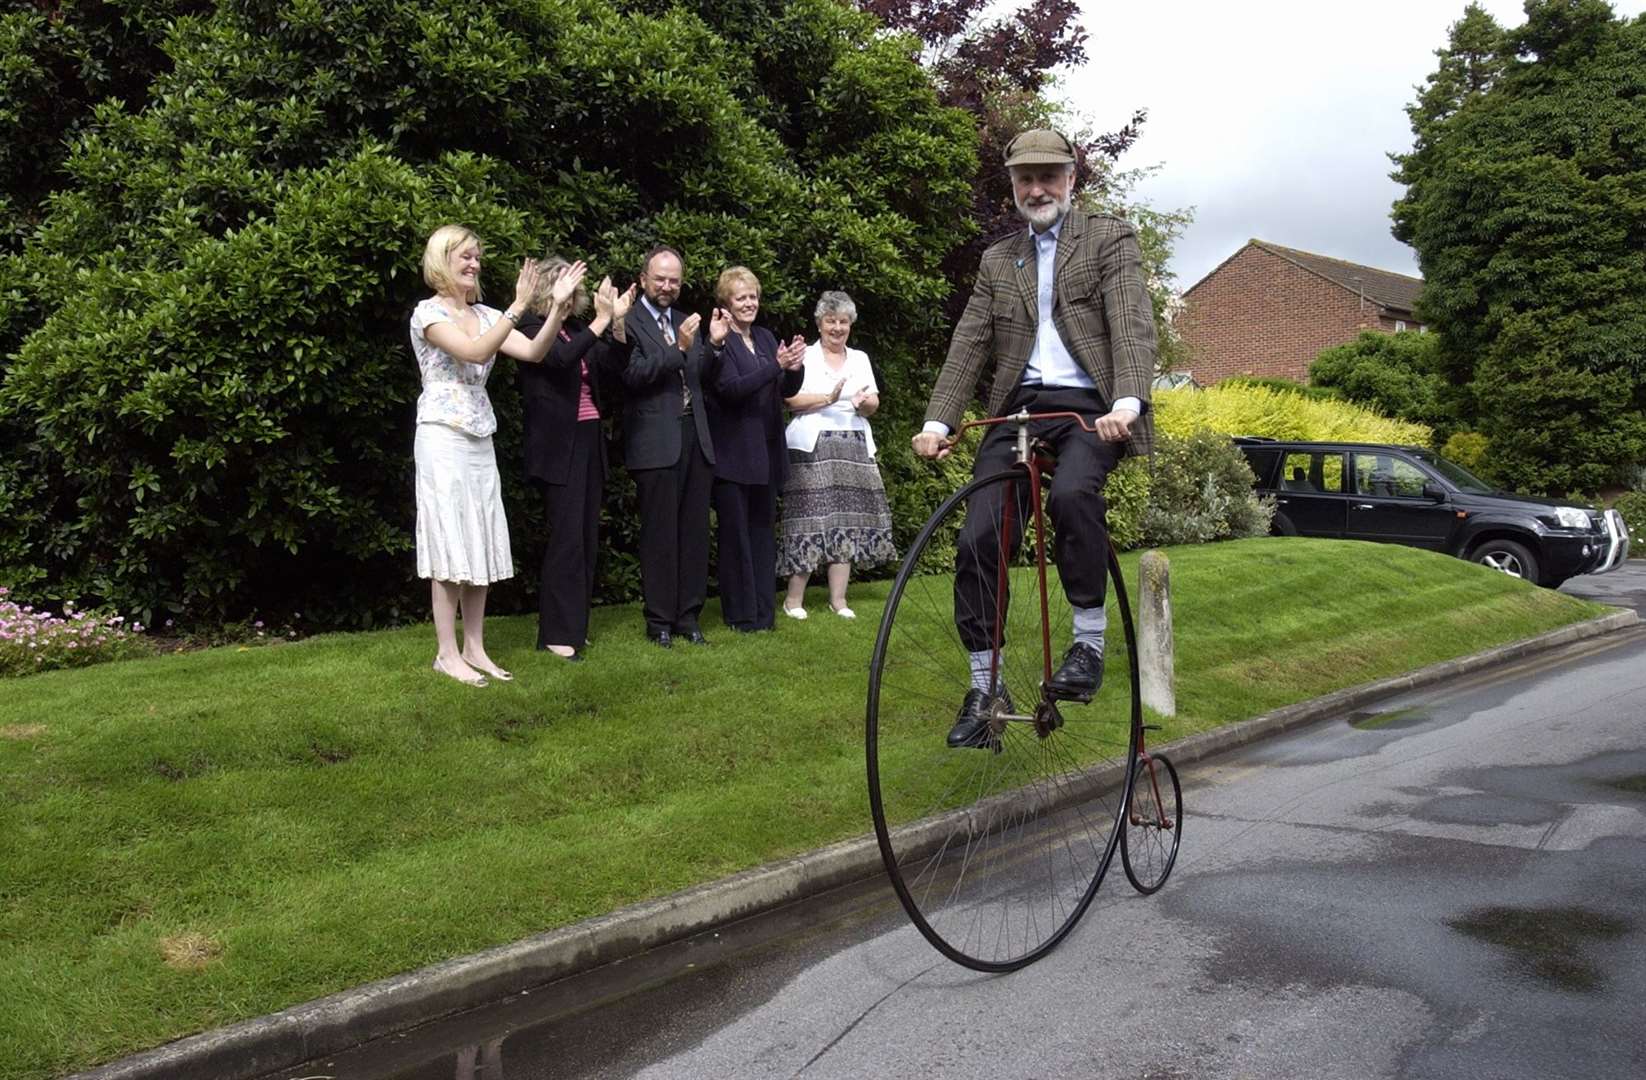 Pilgrims Hospice boss Steve Auty masters the penny-farthing as part of Canterbury's lead-up to July 8. Pic Gerry Whittaker